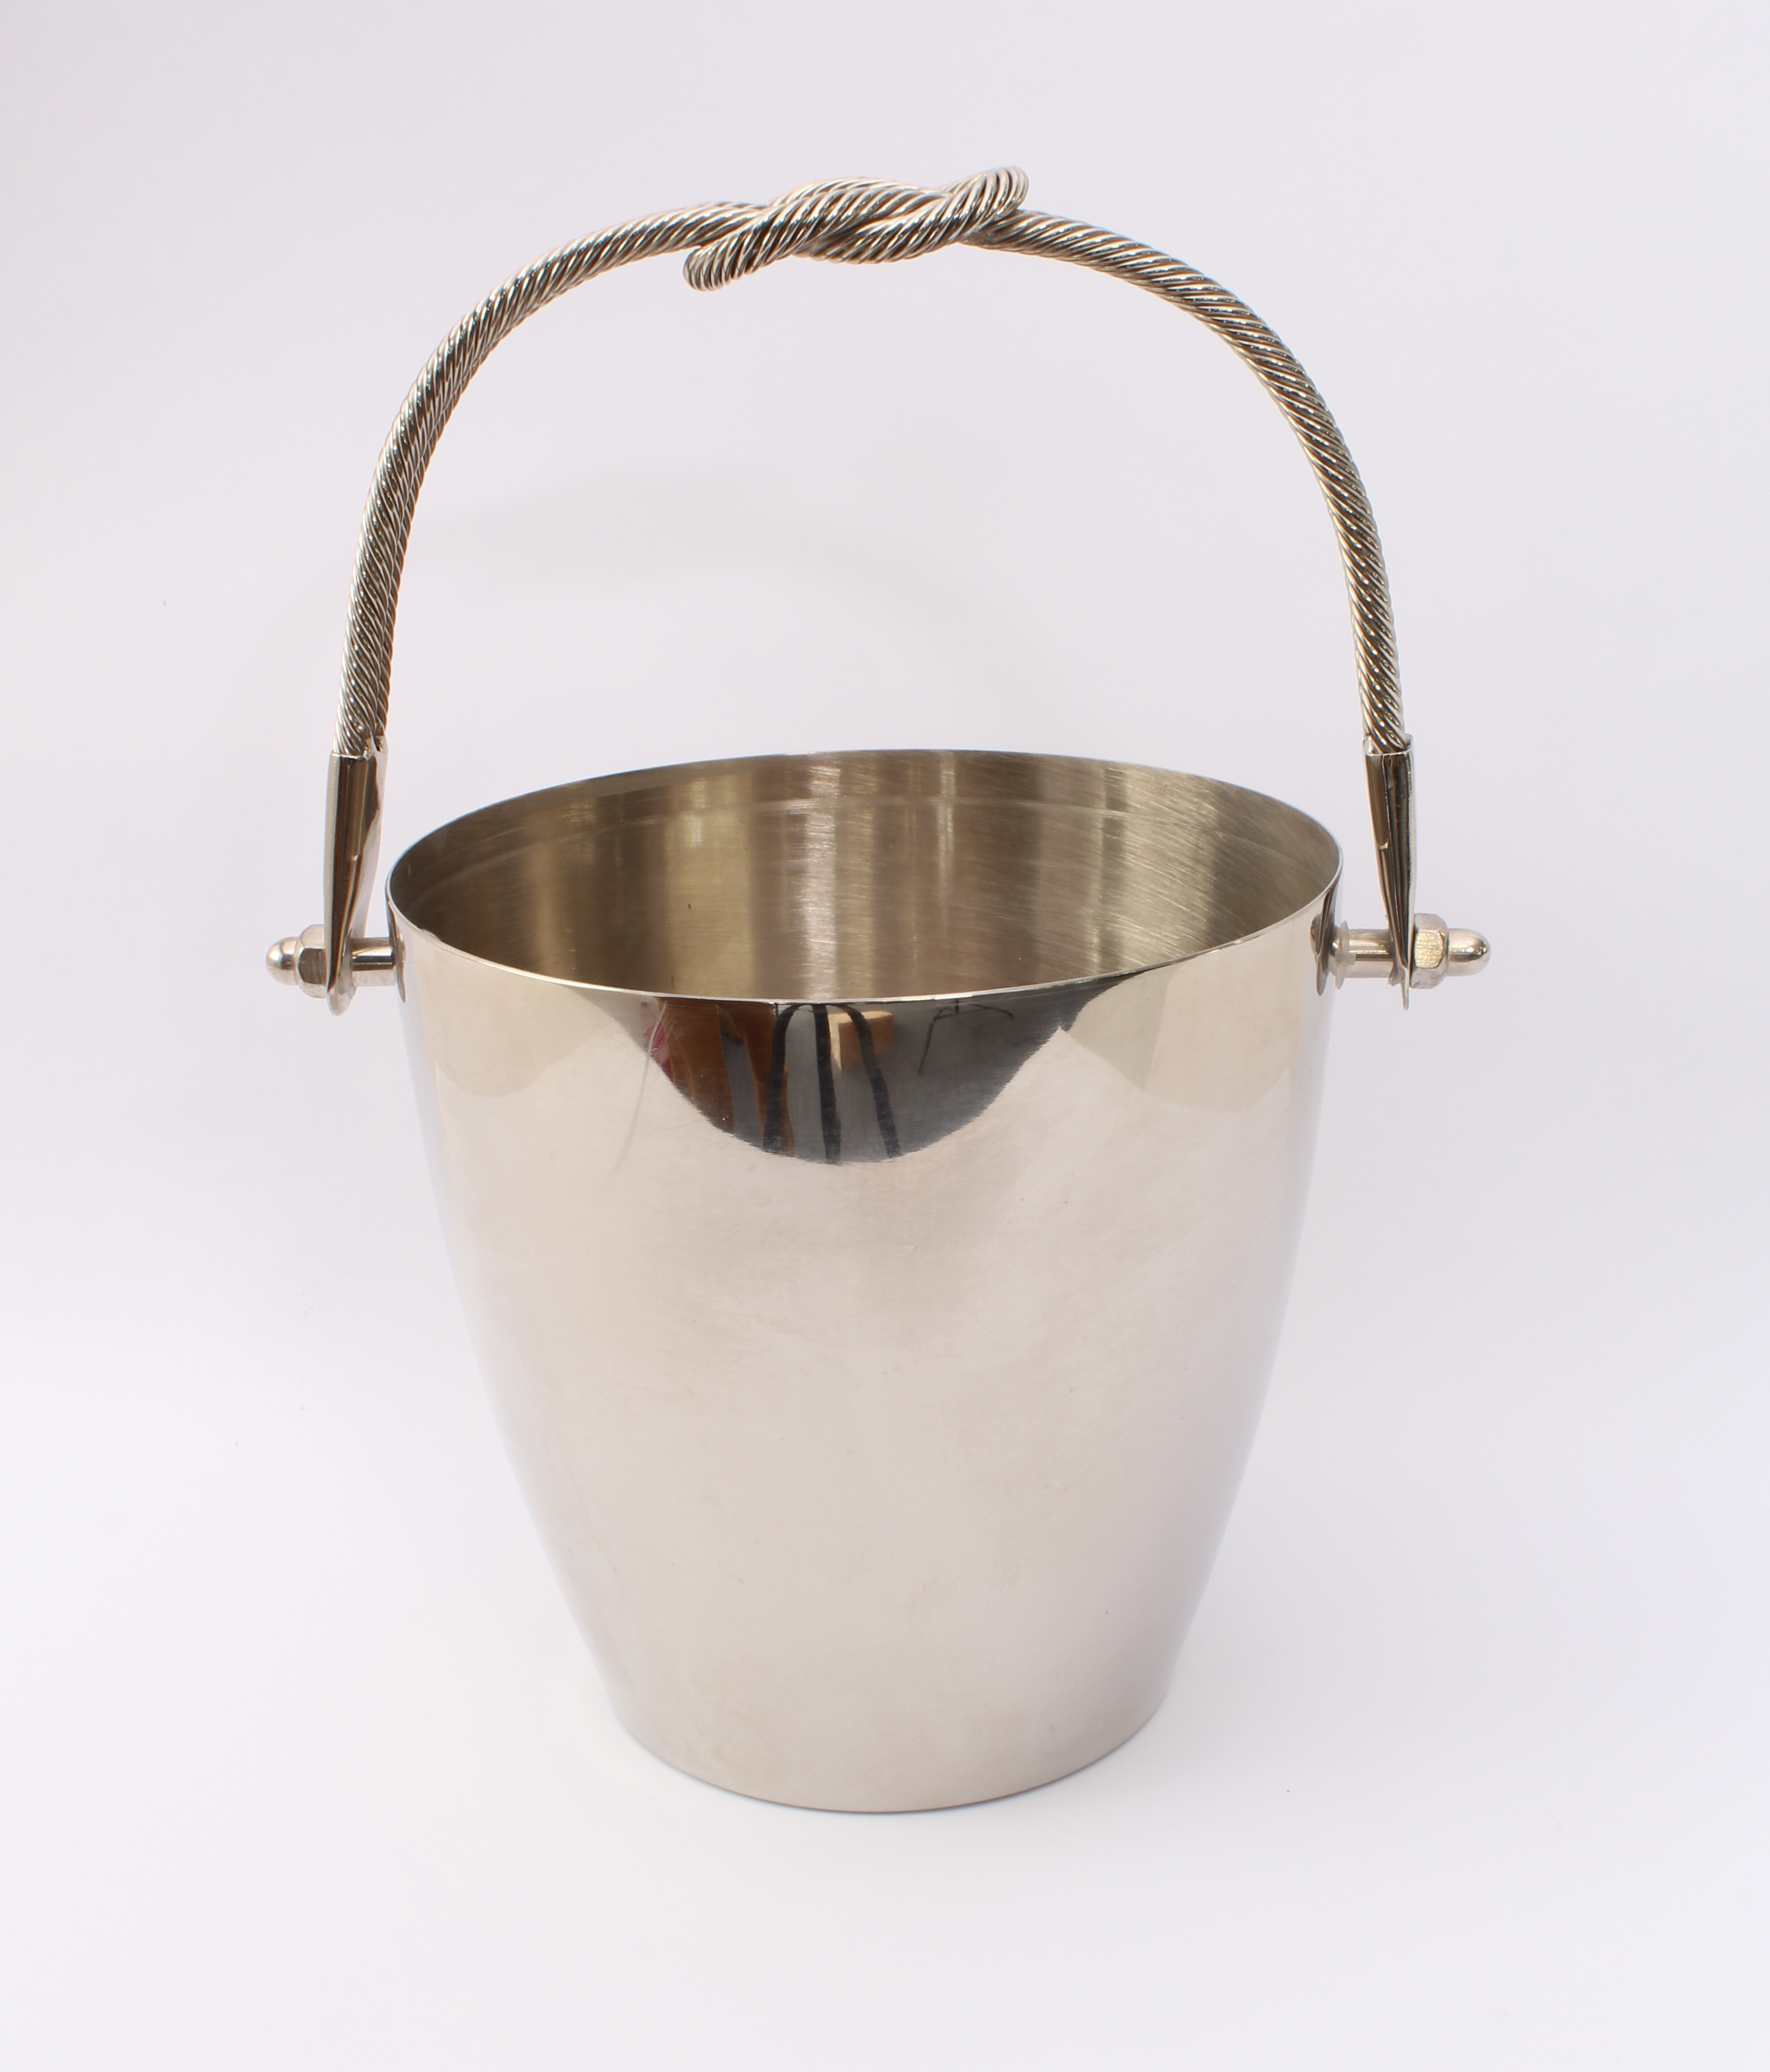 A stainless steel wine cooler - the swing-handle fashioned as twin ropes with central reef knot,